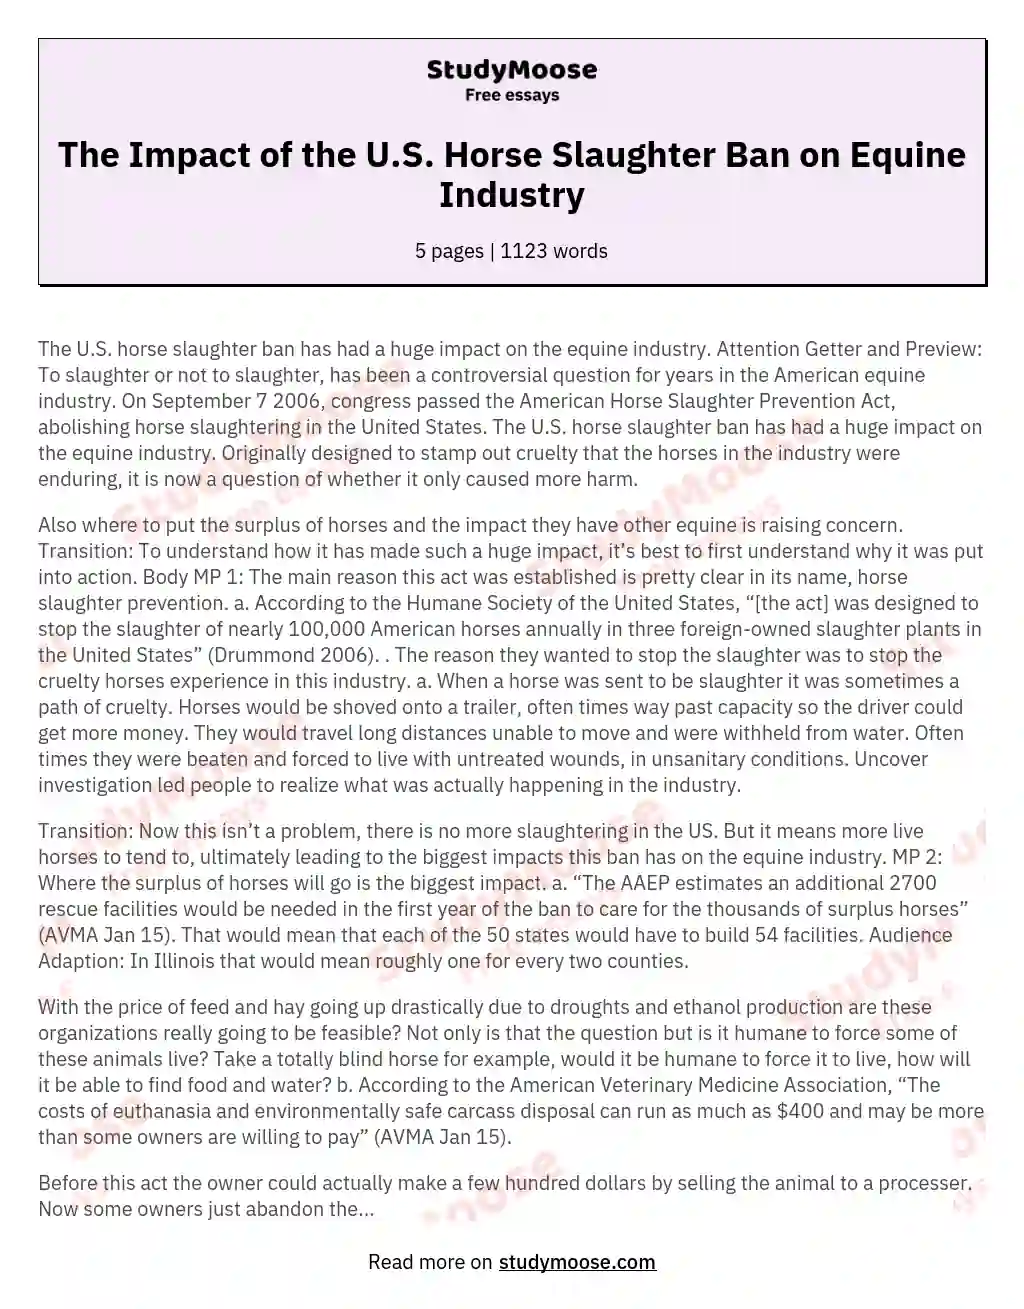 The Impact of the U.S. Horse Slaughter Ban on Equine Industry essay